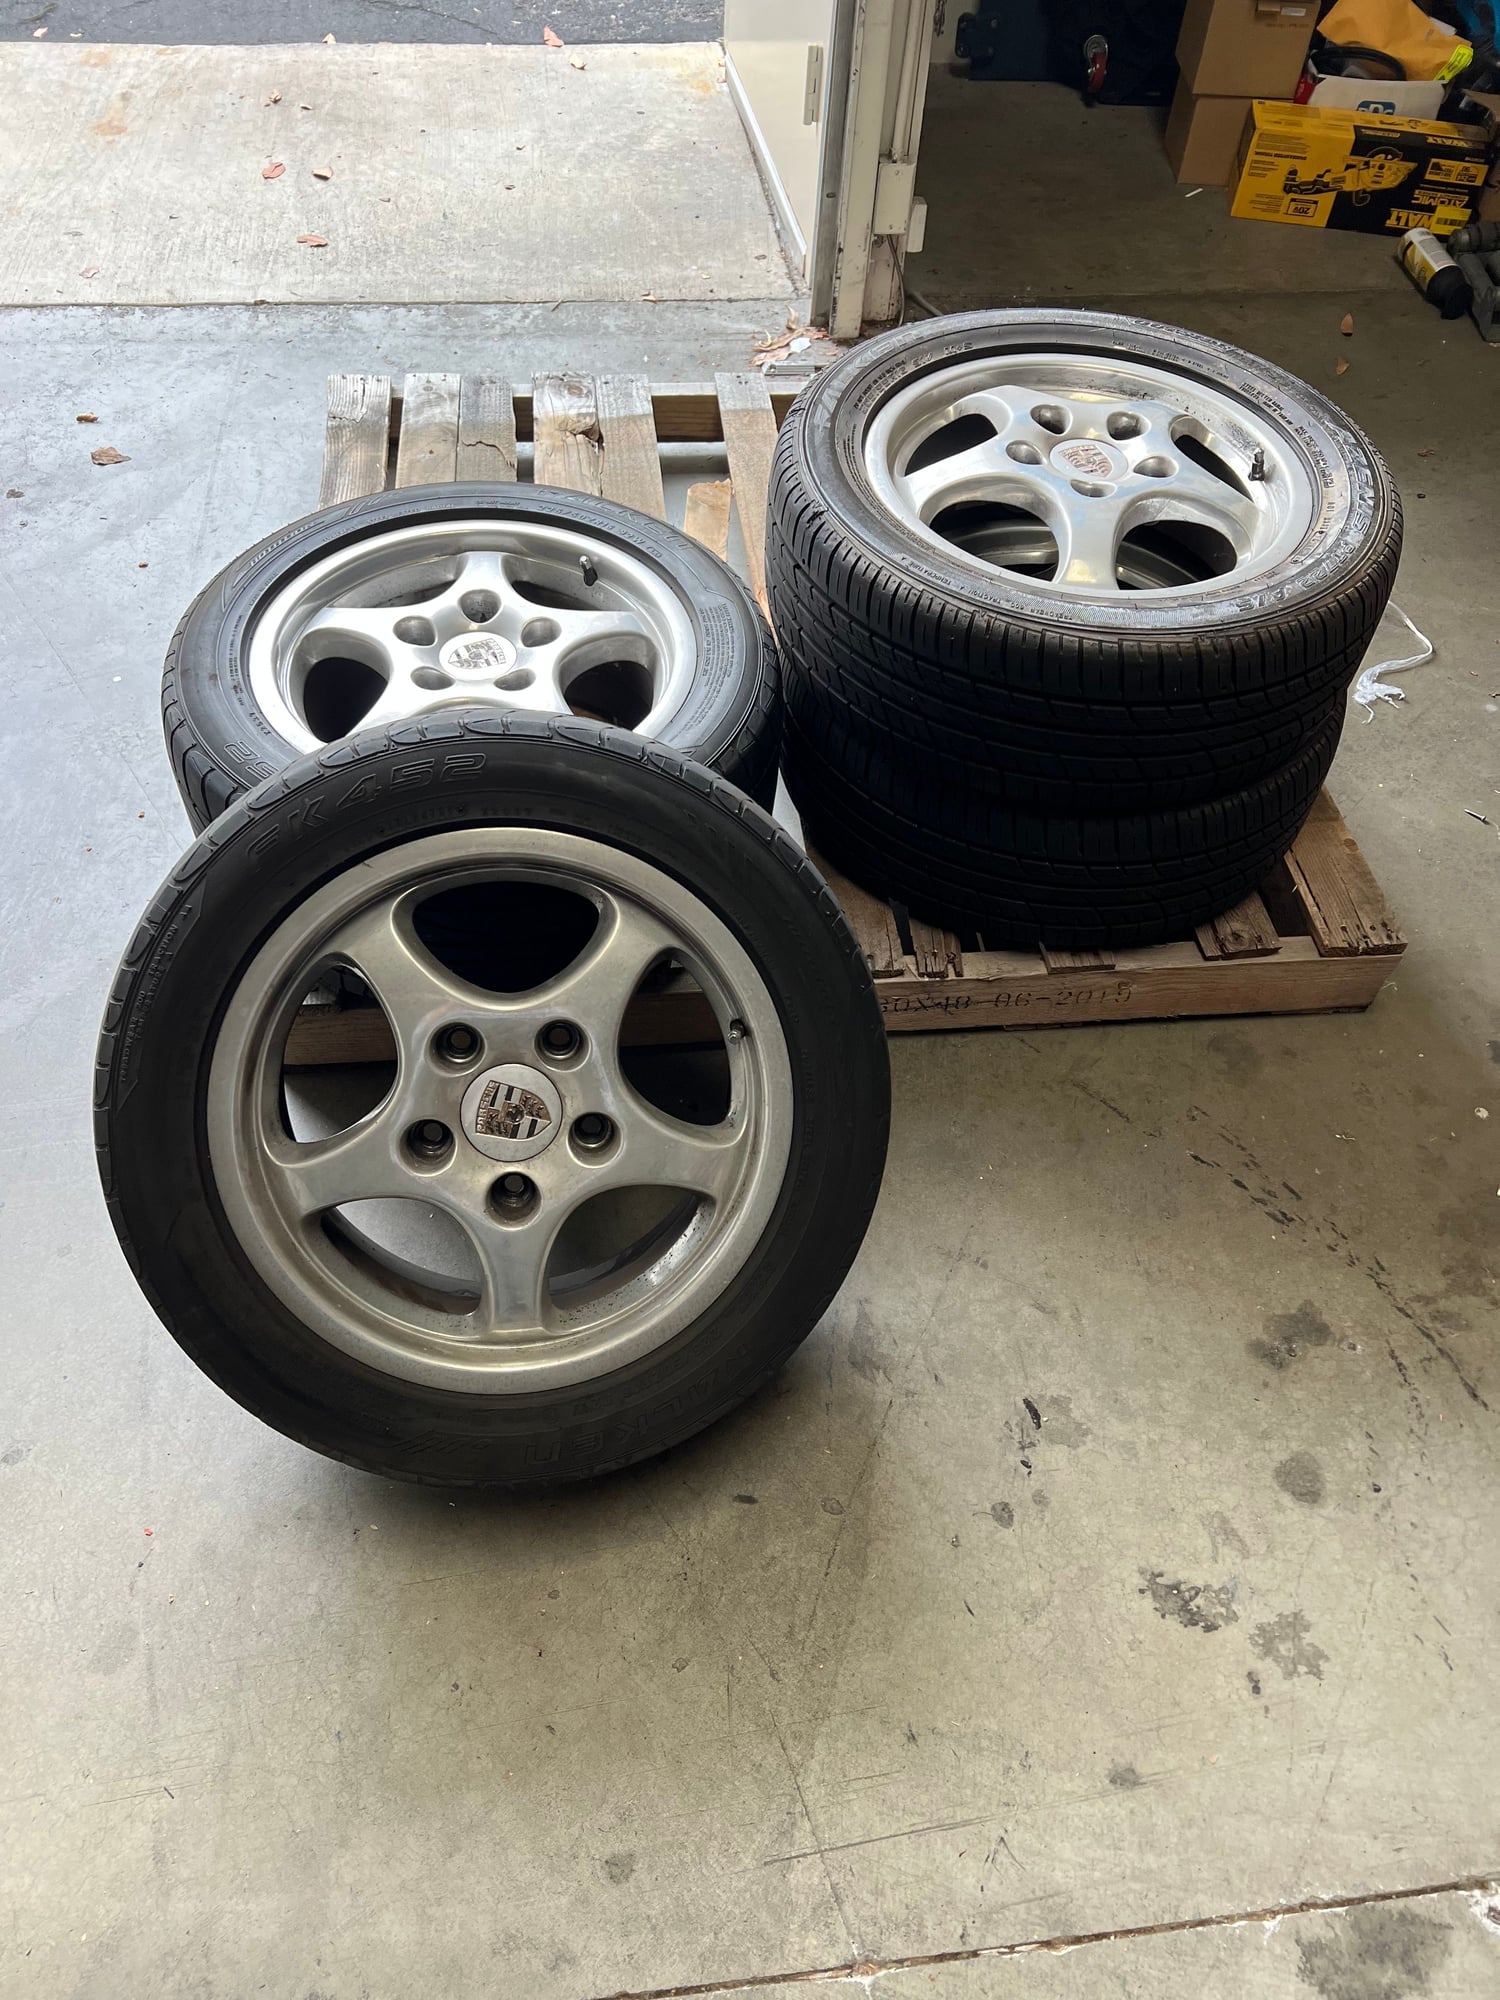 Wheels and Tires/Axles - FS: 964 16” Cup I Wheels - Used - 1989 to 1994 Porsche 911 - Brea, CA 92821, United States